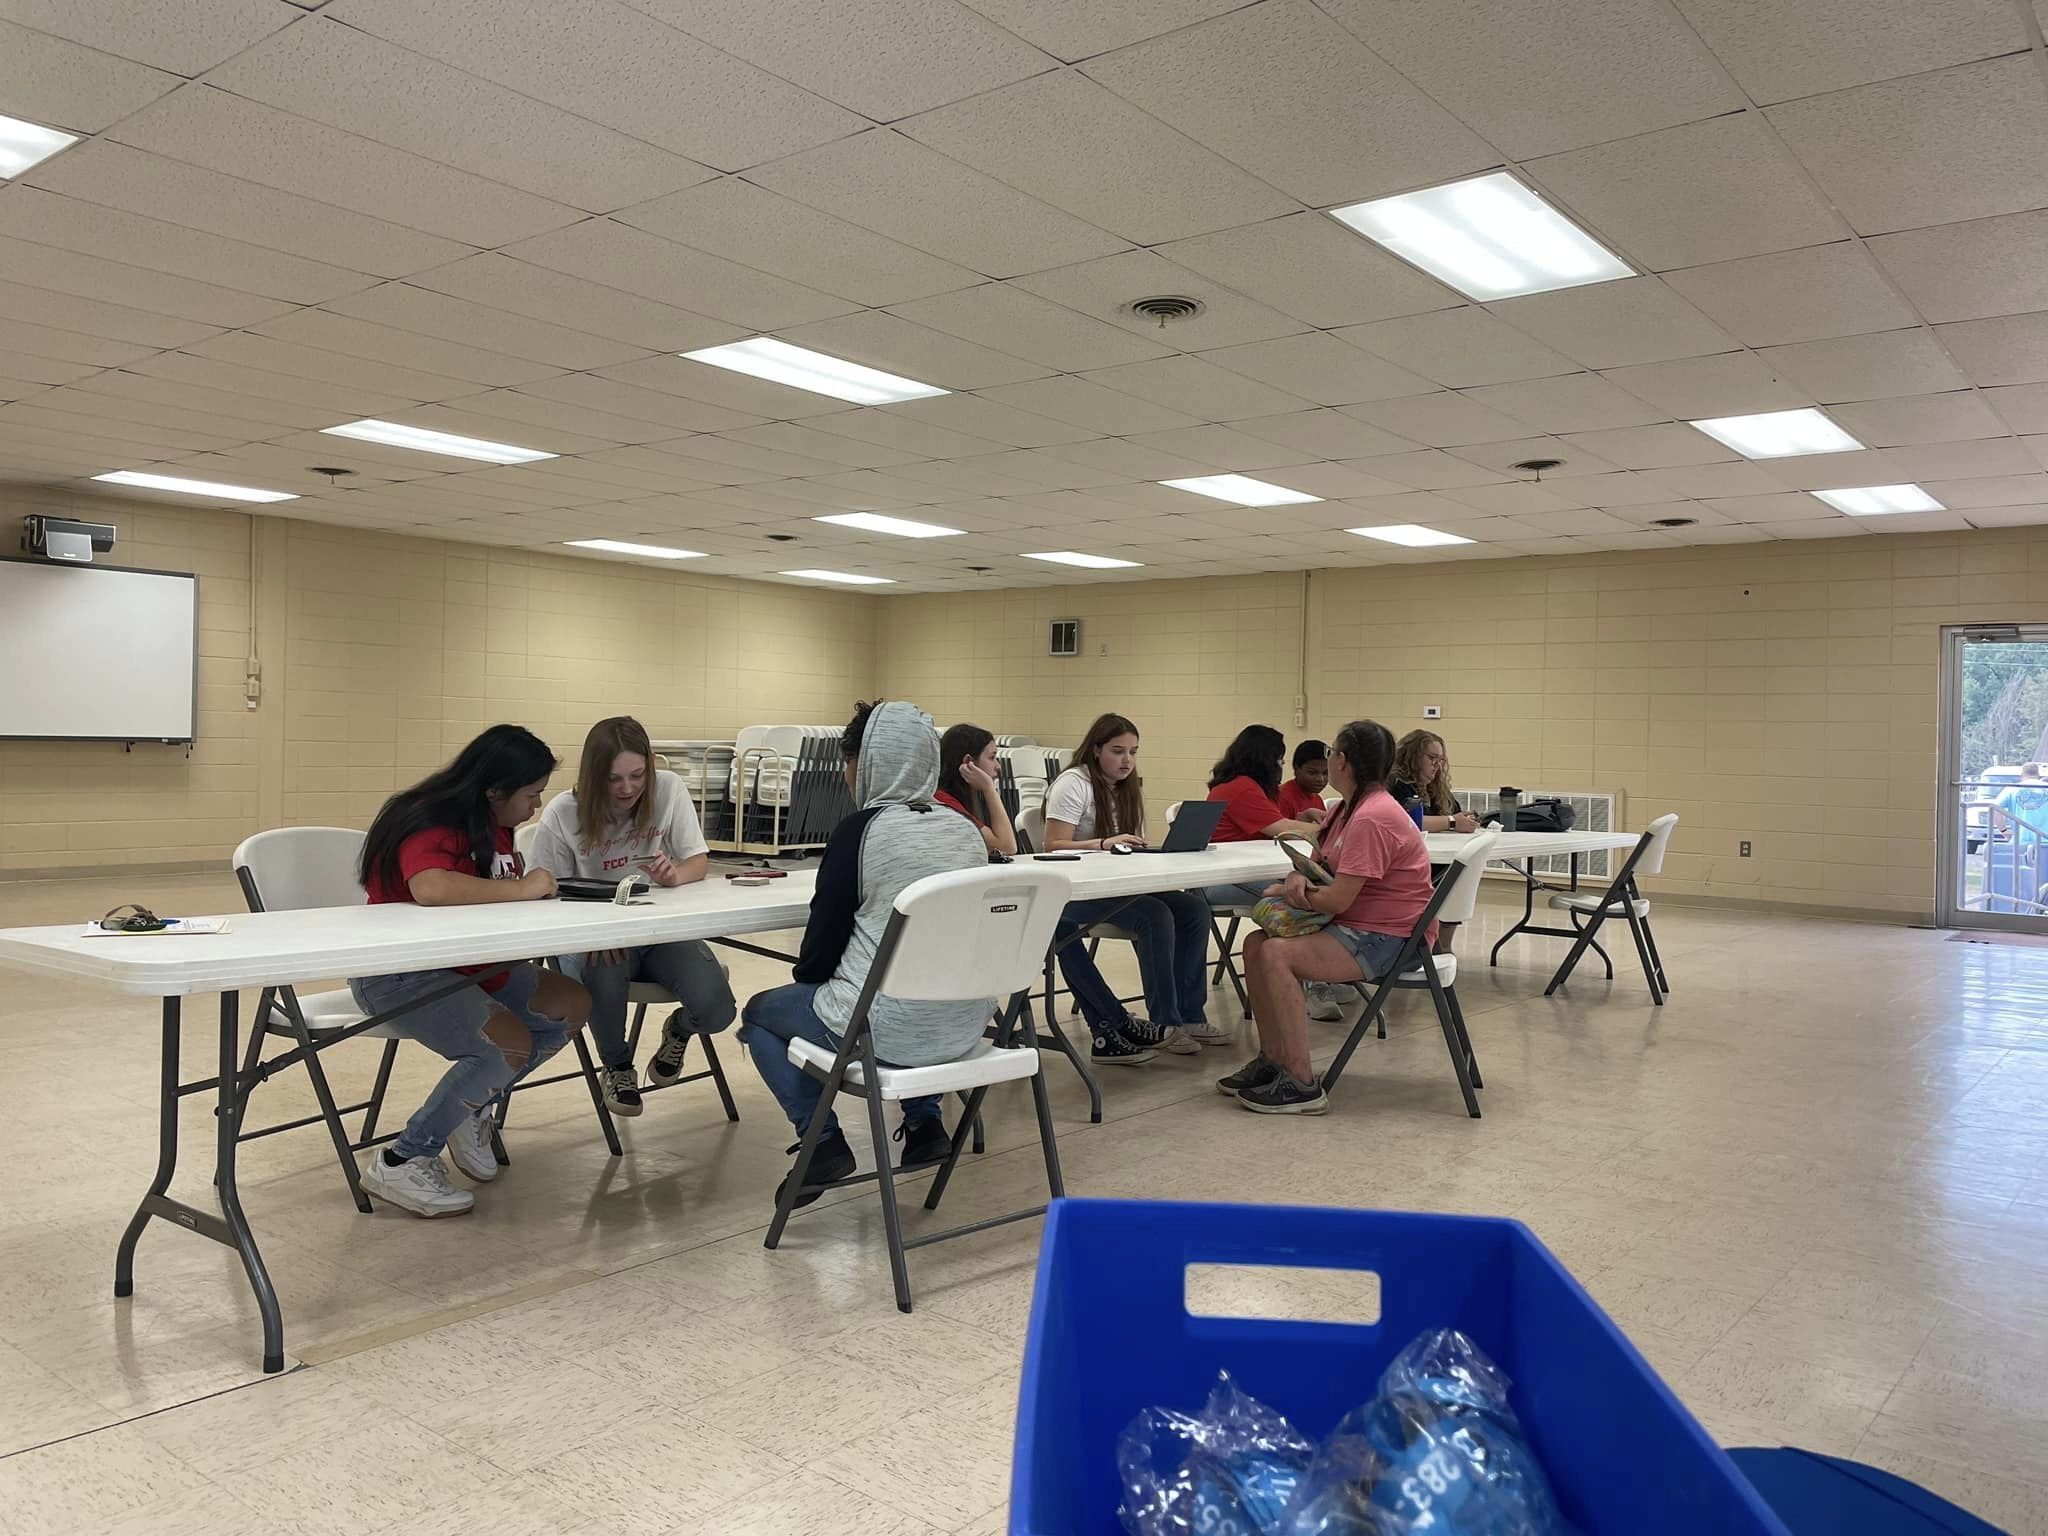 Youth at Pike County Community Center